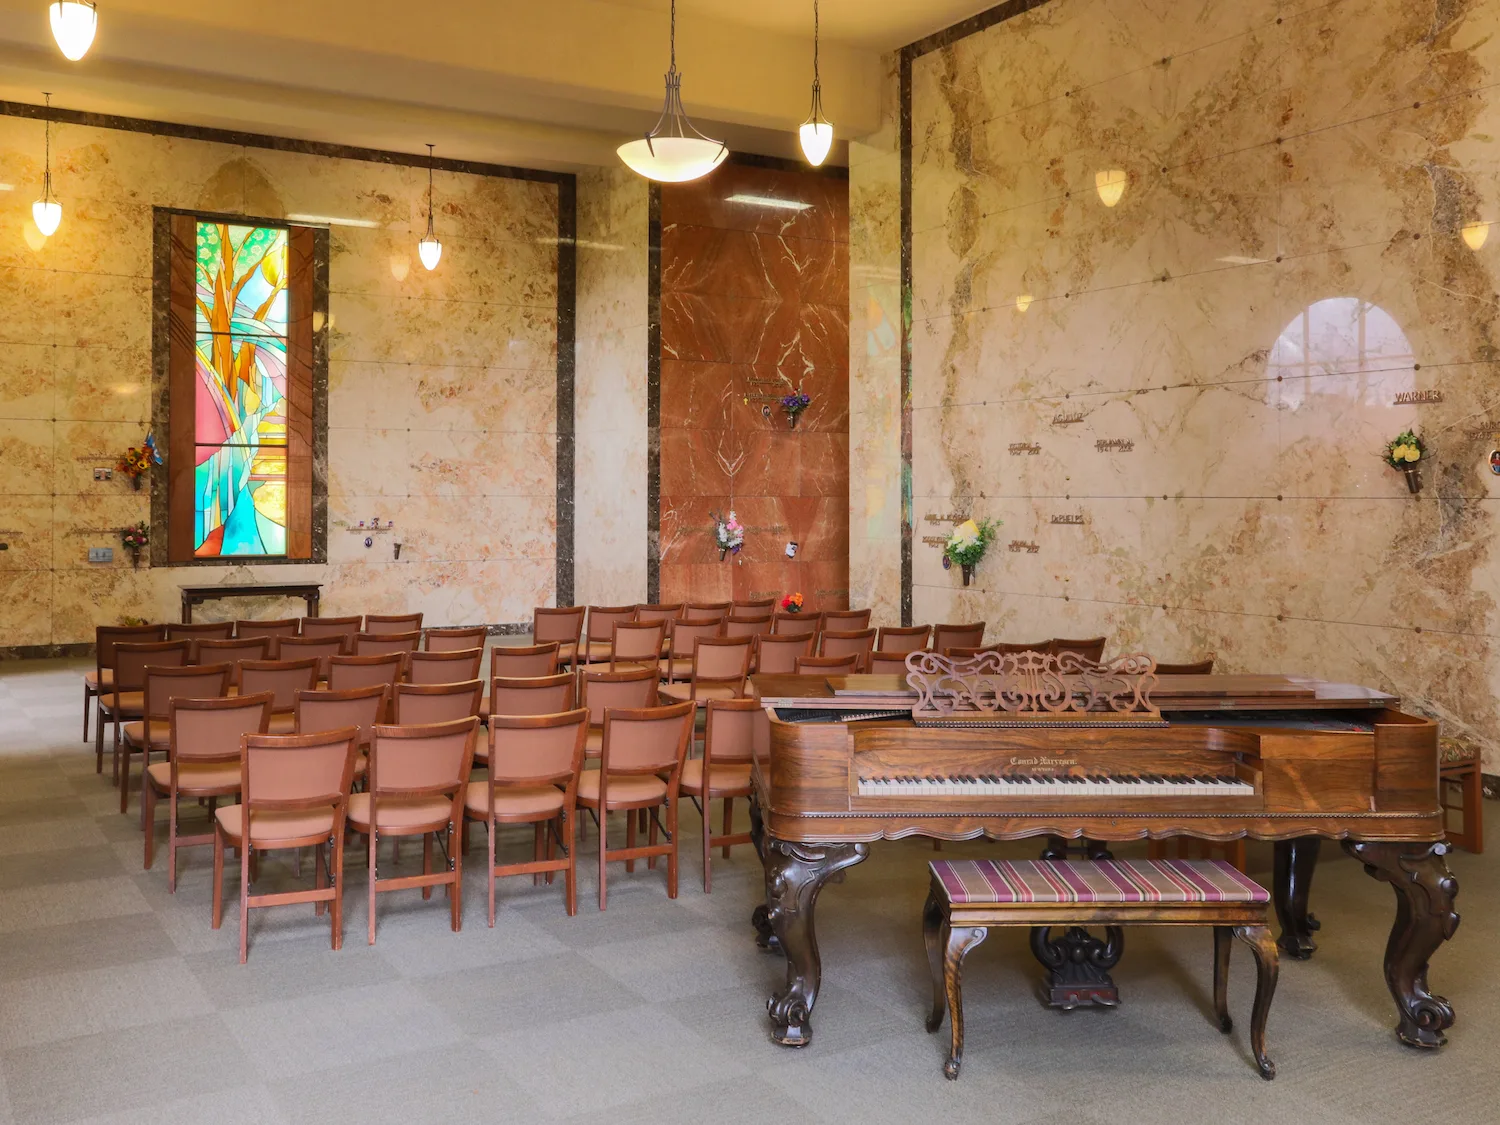 Marble mausoleum with beautiful wooden piano, chairs, and colorful stained glass window